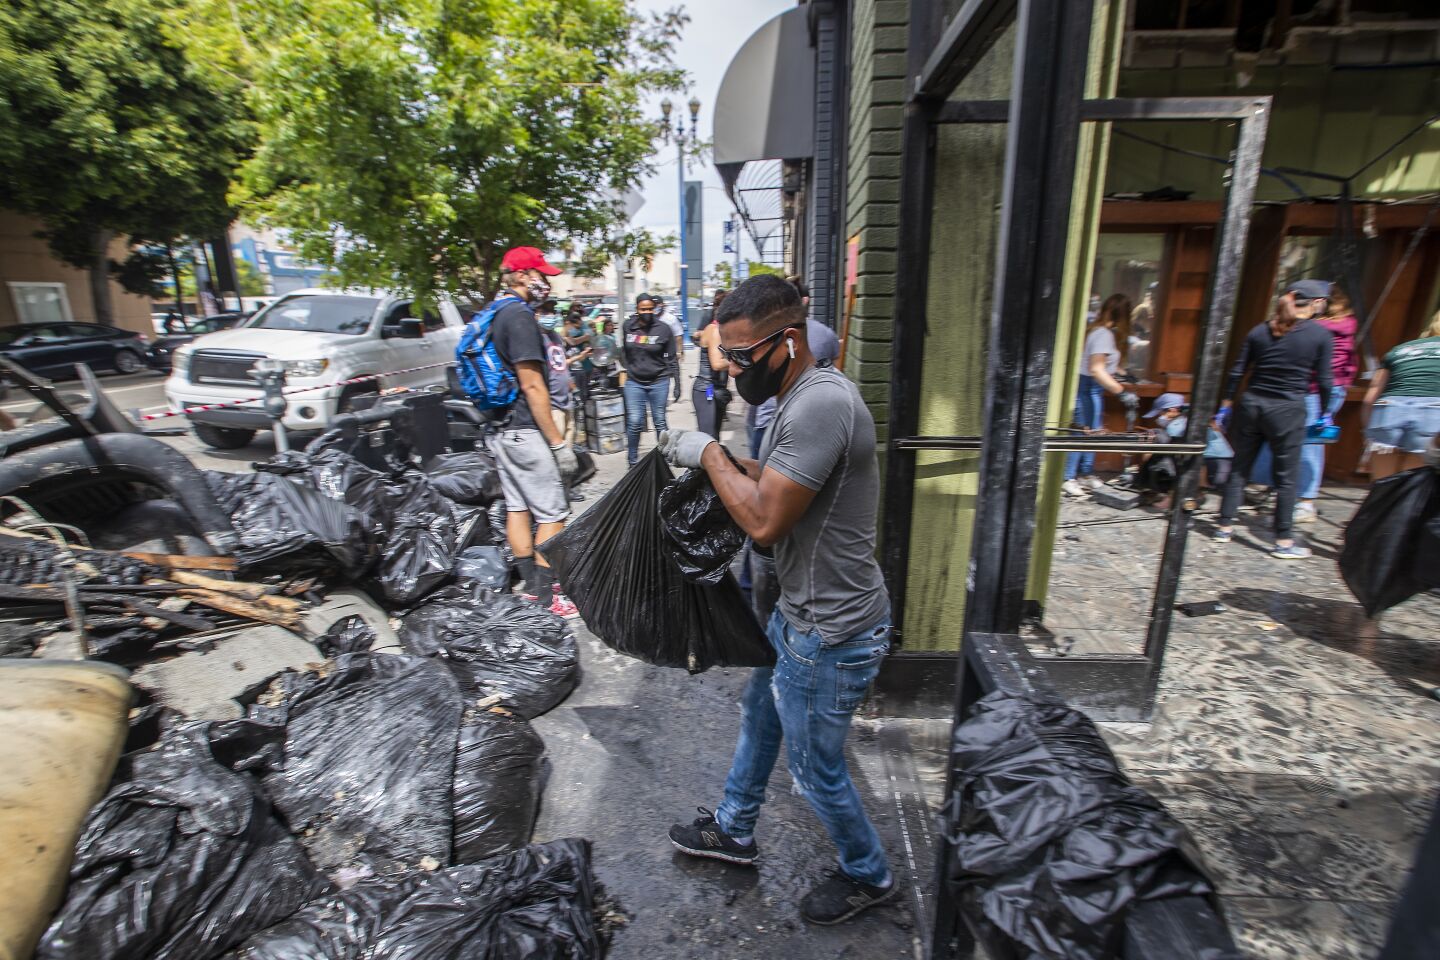 Volunteers help clean up a hair salon in Long Beach on Monday, a day after widespread looting.